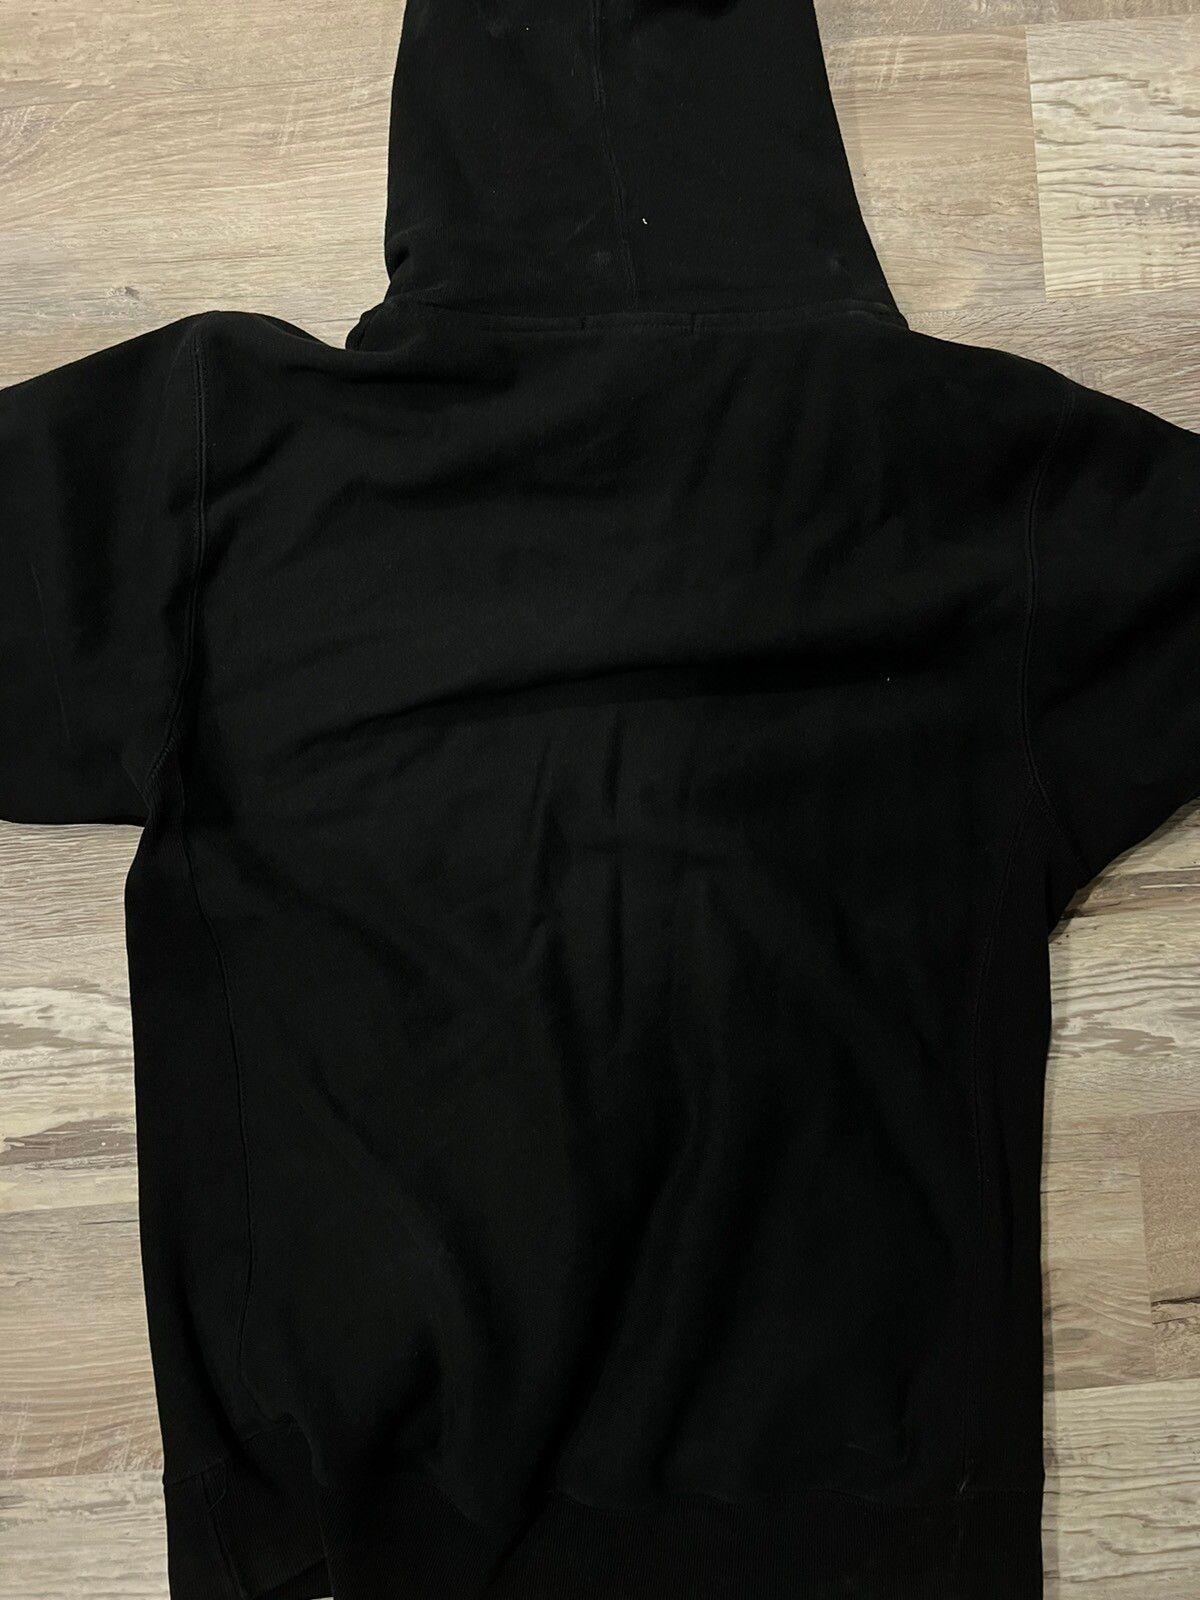 Undercover Undercover Groupie Hoodie Size US L / EU 52-54 / 3 - 3 Thumbnail